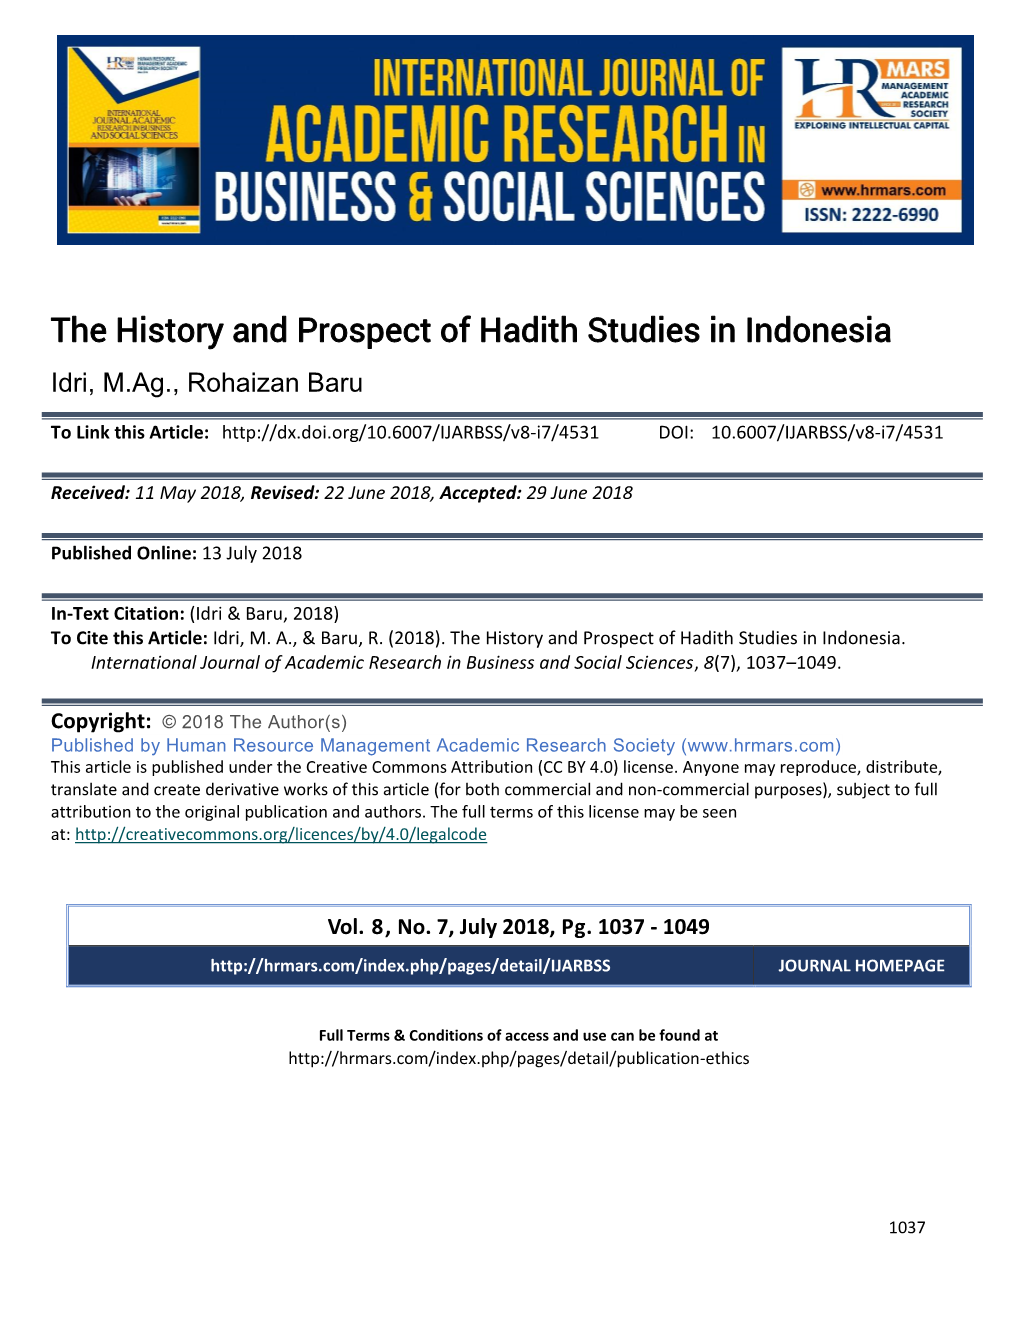 The History and Prospect of Hadith Studies in Indonesia